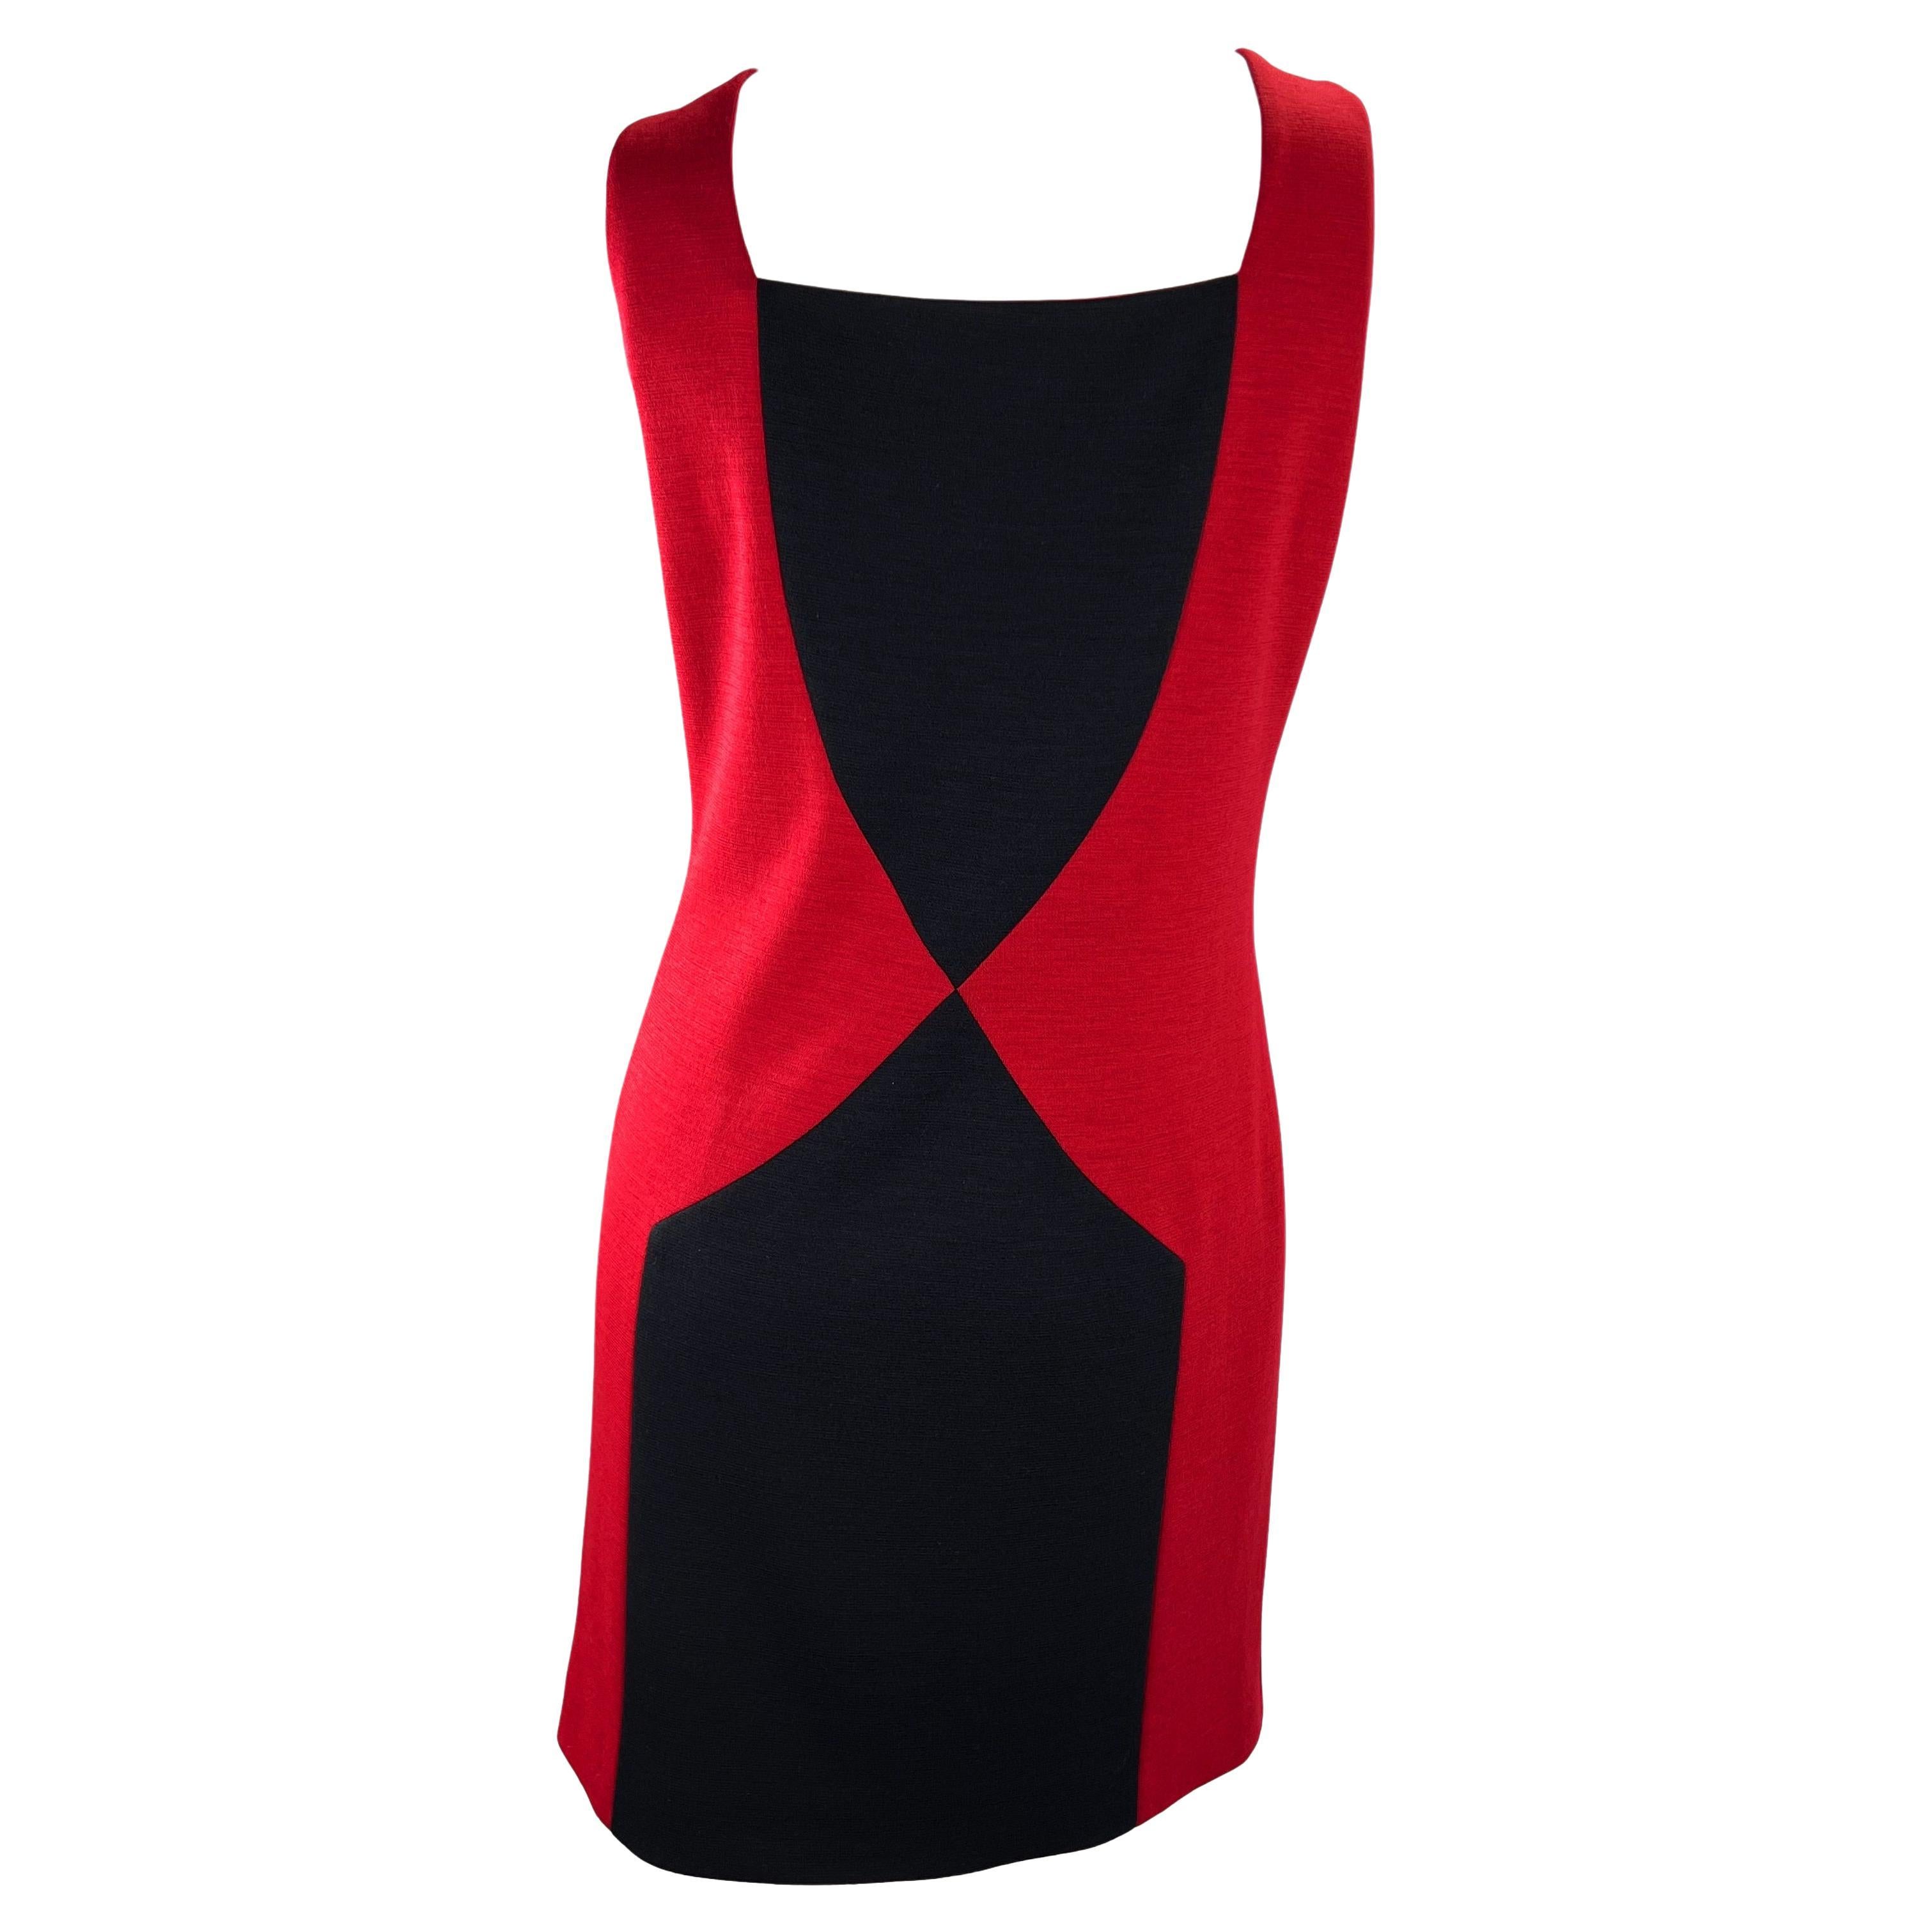 F/W 1997 Gianni Versace Couture Runway Red Colorblock Sleeveless Dress For Sale 1